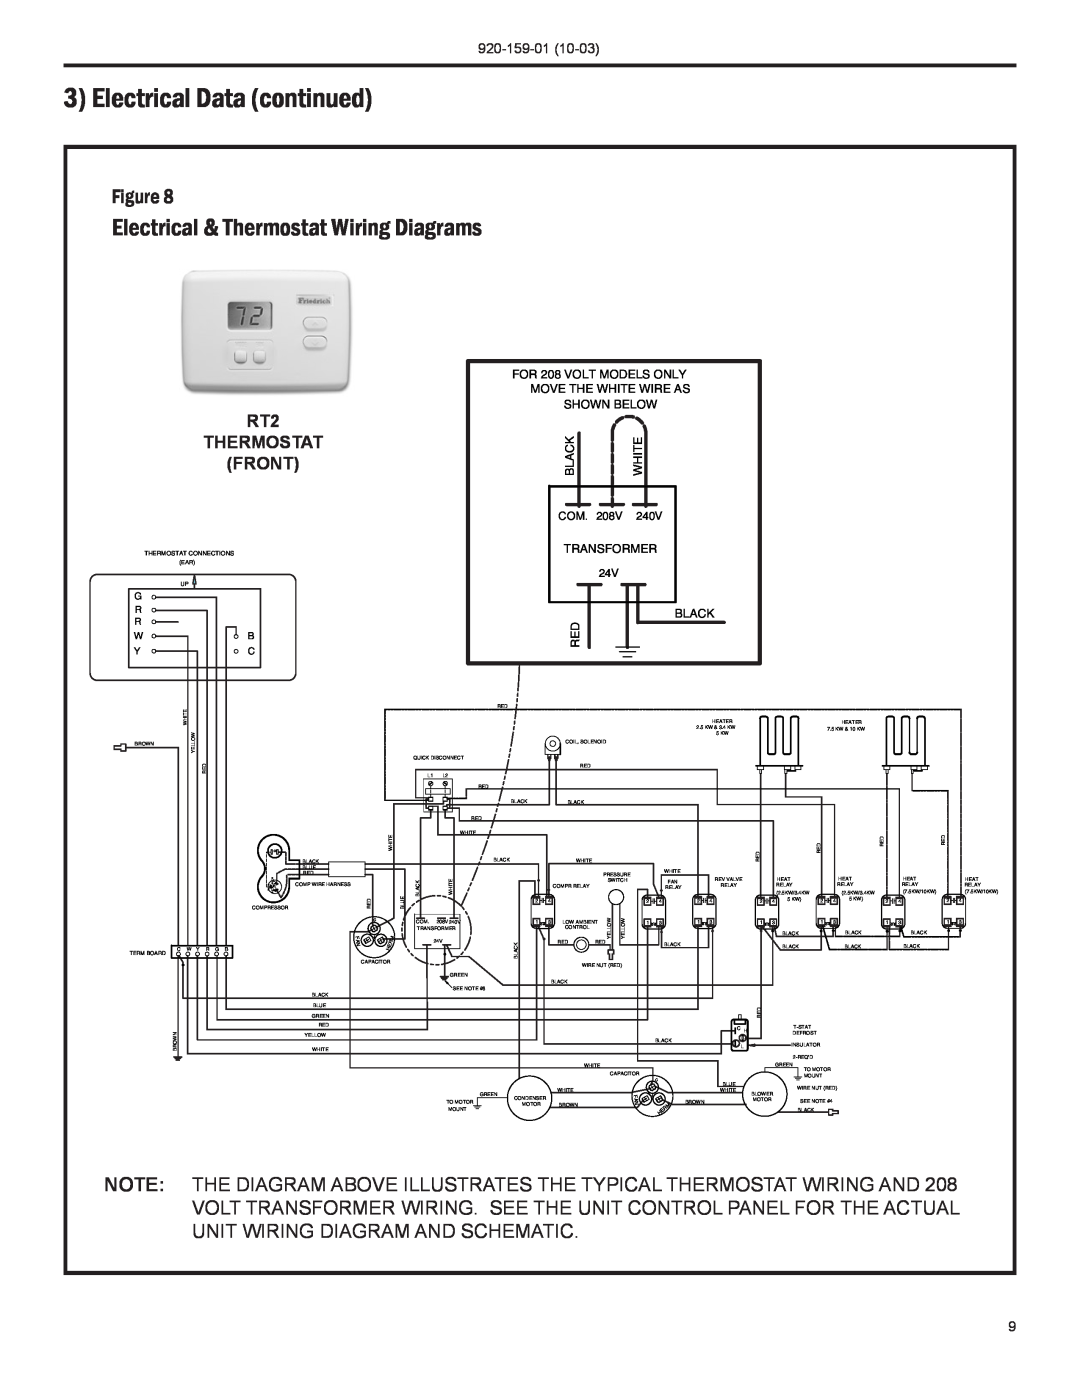 Friedrich 920-159-01 (10-03) Electrical Data continued, Electrical & Thermostat Wiring Diagrams, Shown Below, Black, White 